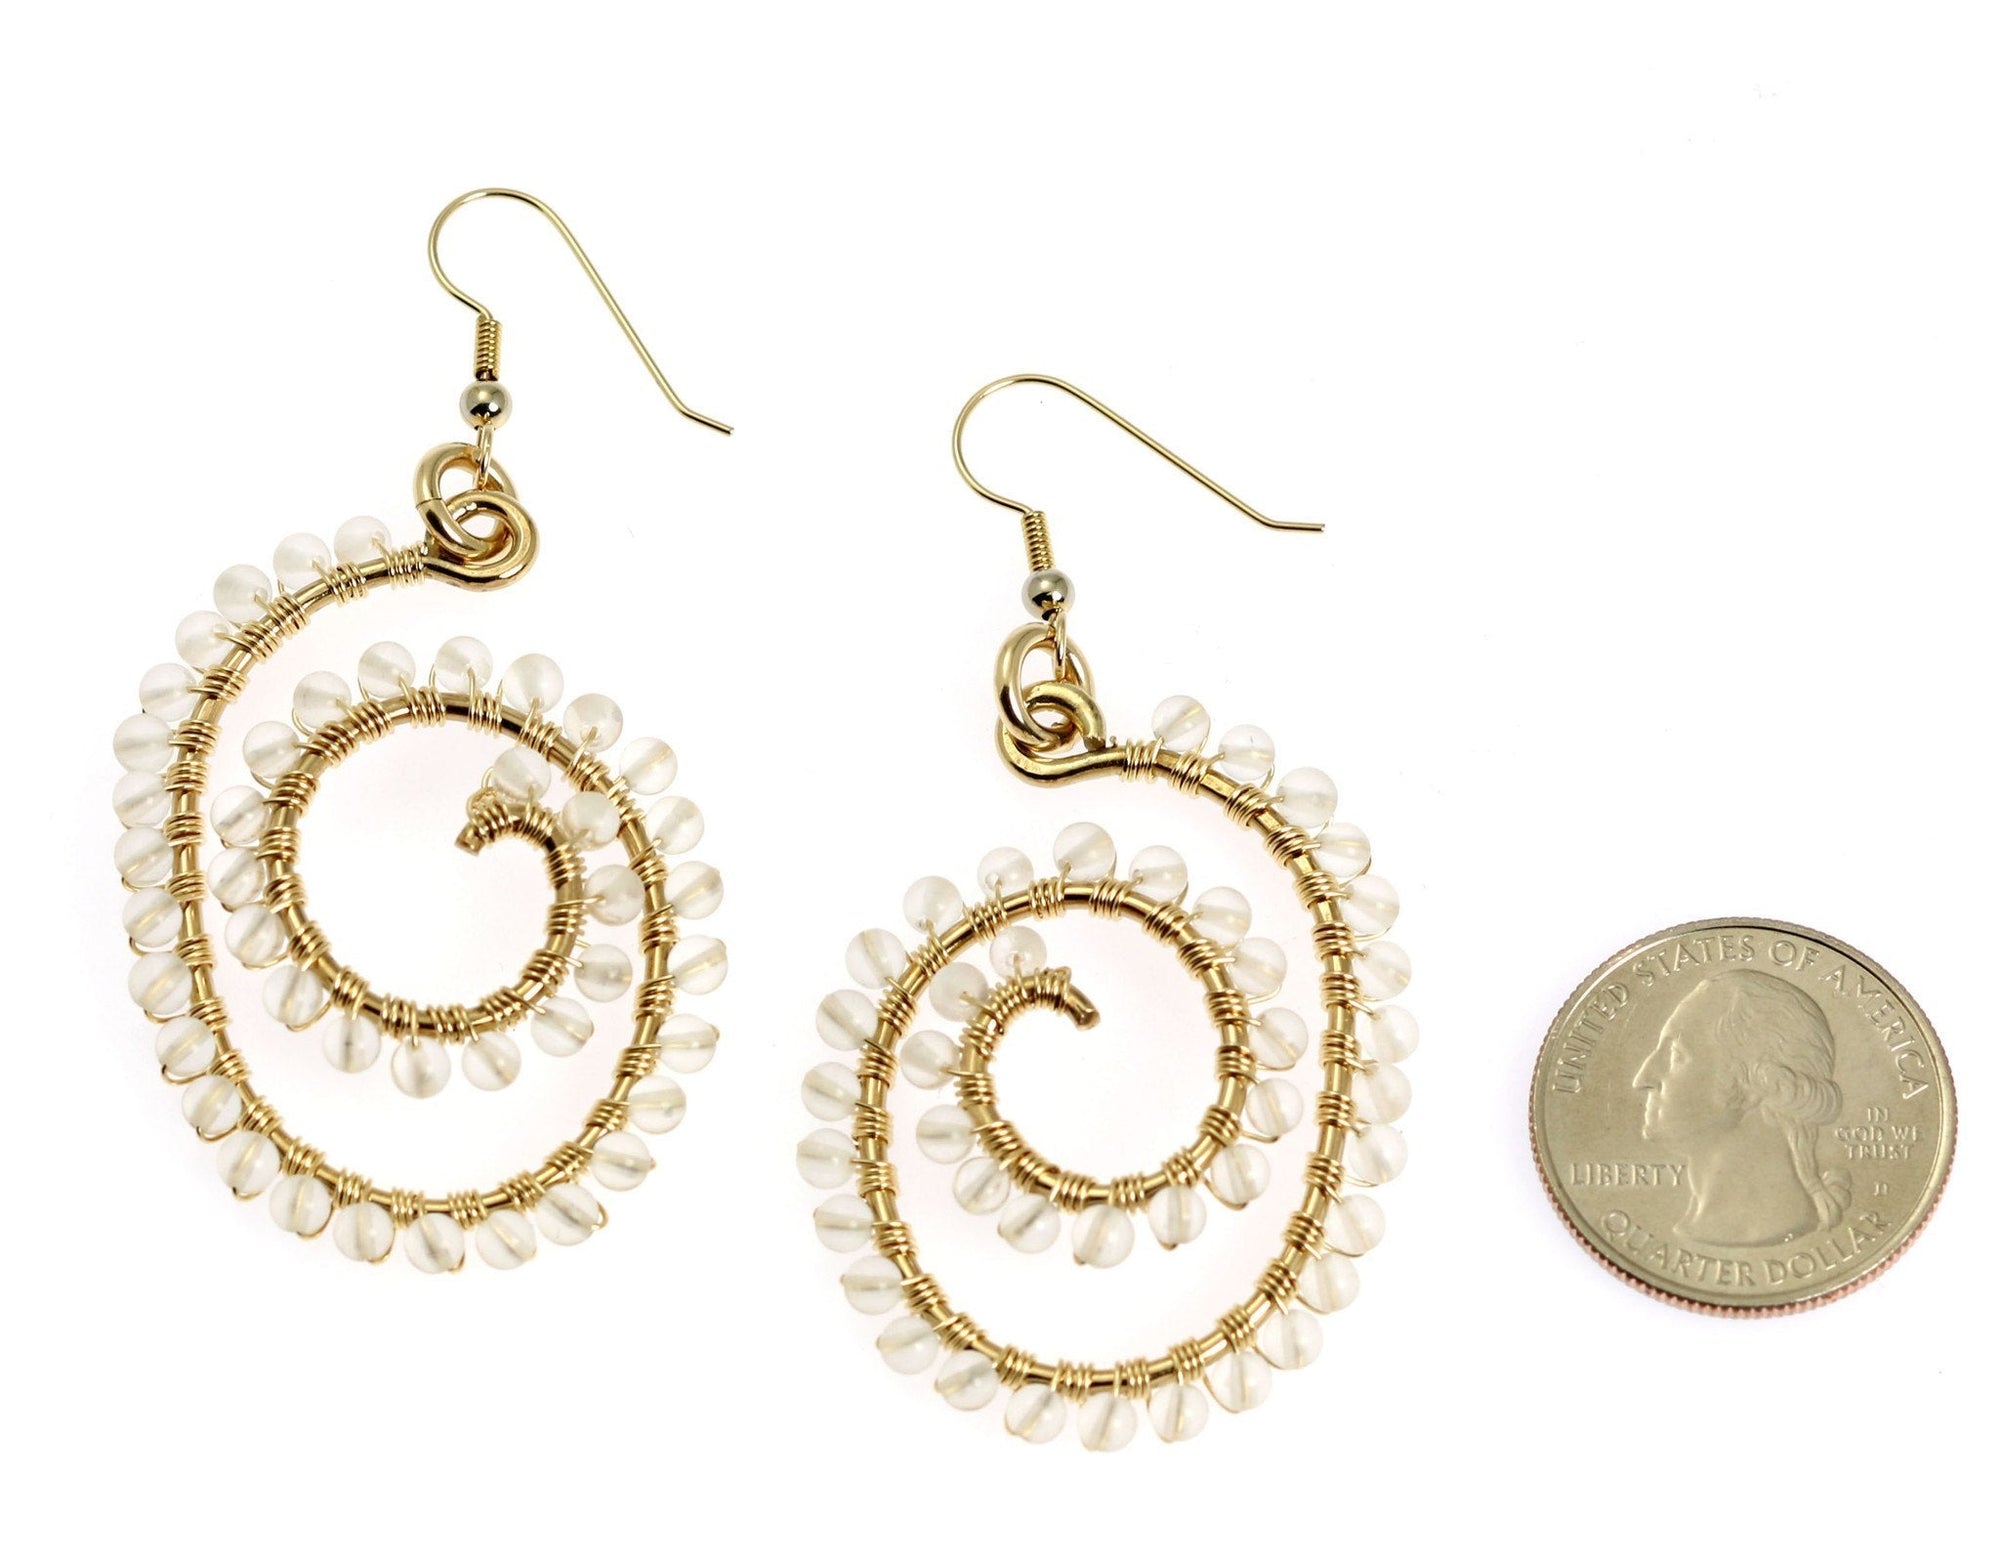 Wire Wrapped Spiral Earrings With Crystal Quartz Gemstones